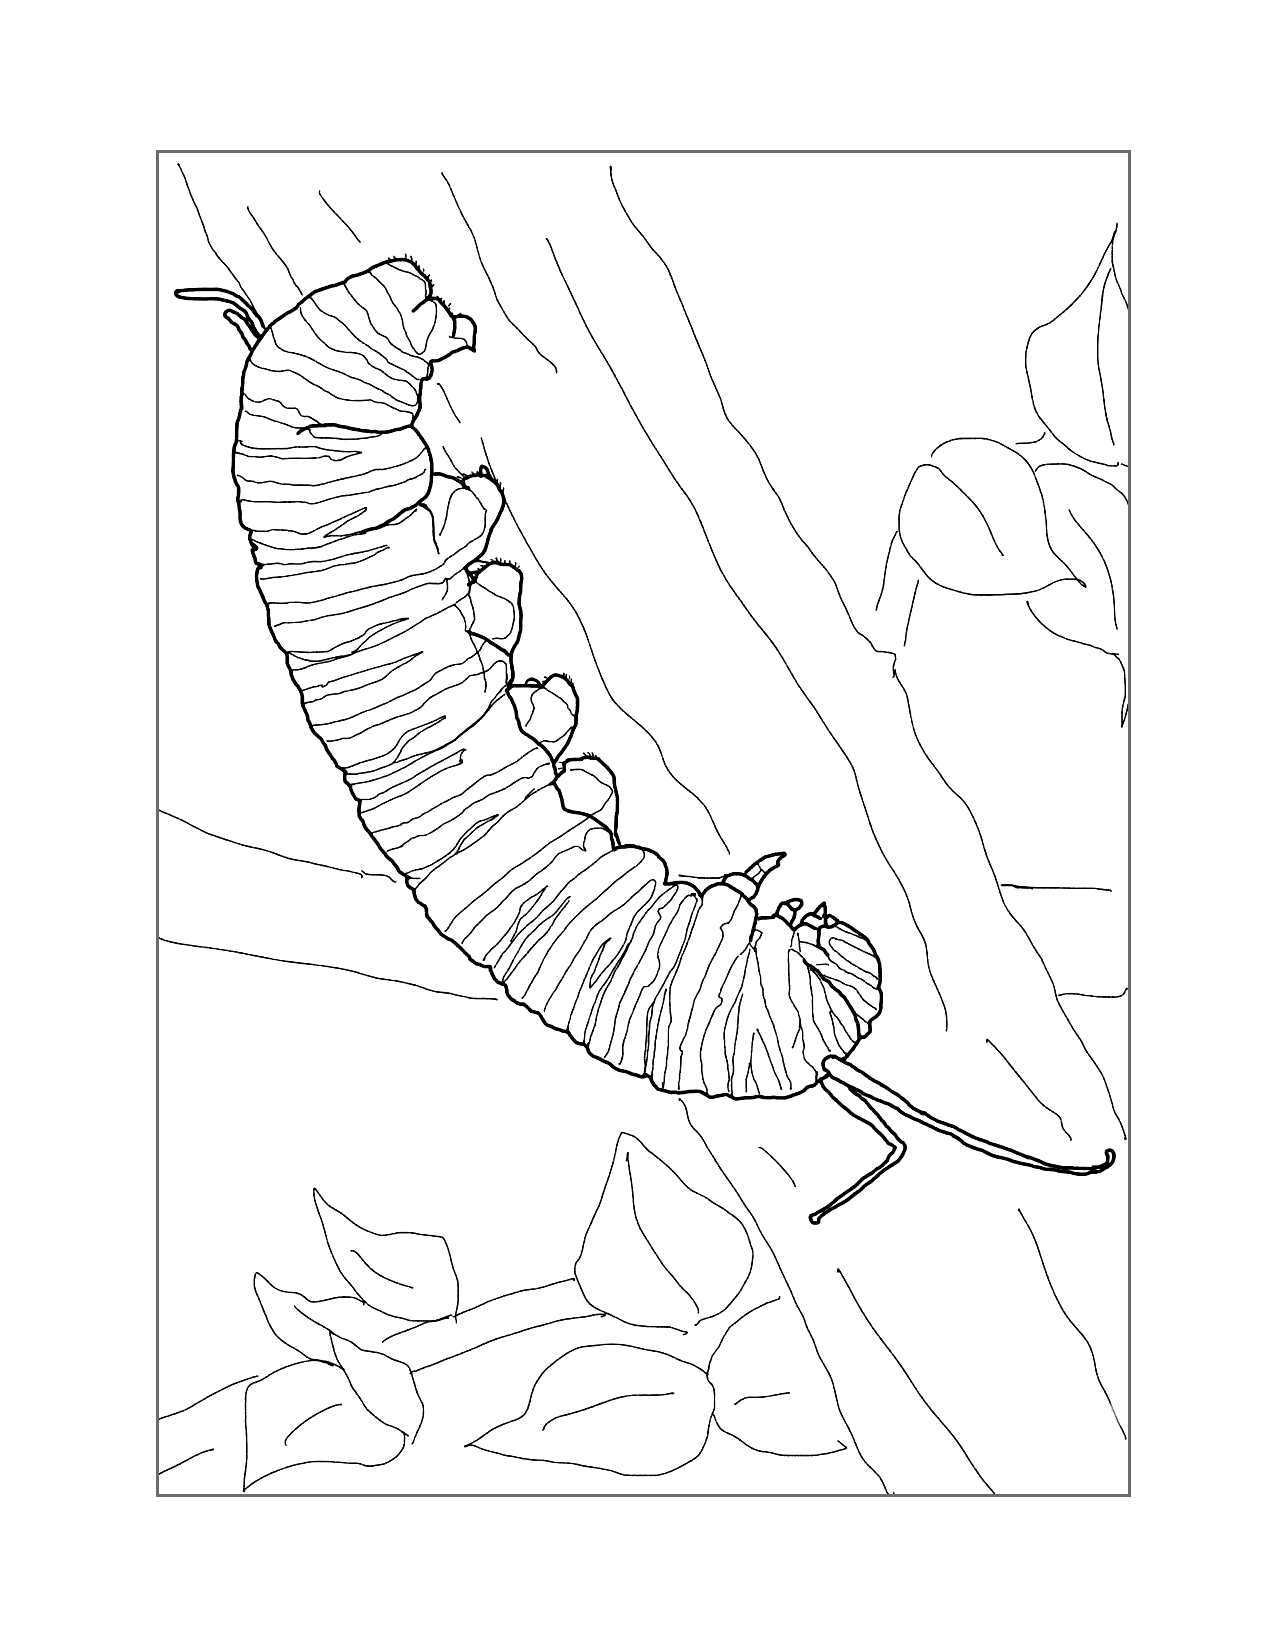 Caterpillar Of A Monarch Butterfly Coloring Page